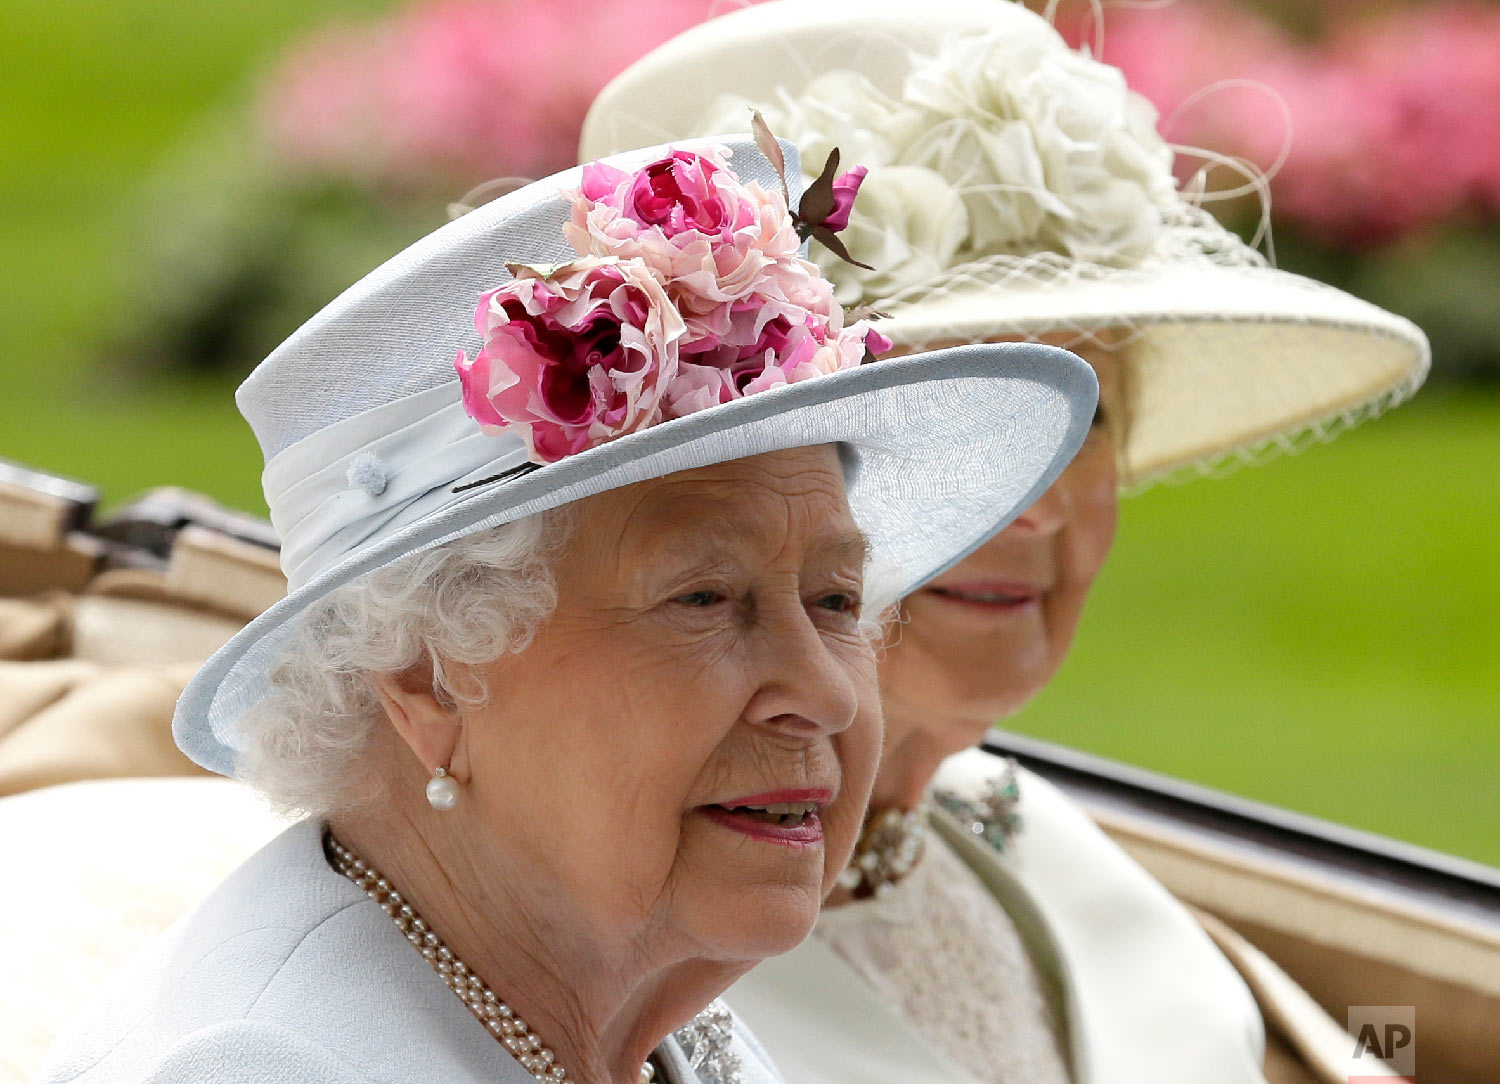  Britain's Queen Elizabeth II arrives at the parade ring with Princess Alexandra in a horse drawn carriage, on the second day of the Royal Ascot horse race meeting in Ascot, England, Wednesday, June 20, 2018. (AP Photo/Tim Ireland) 